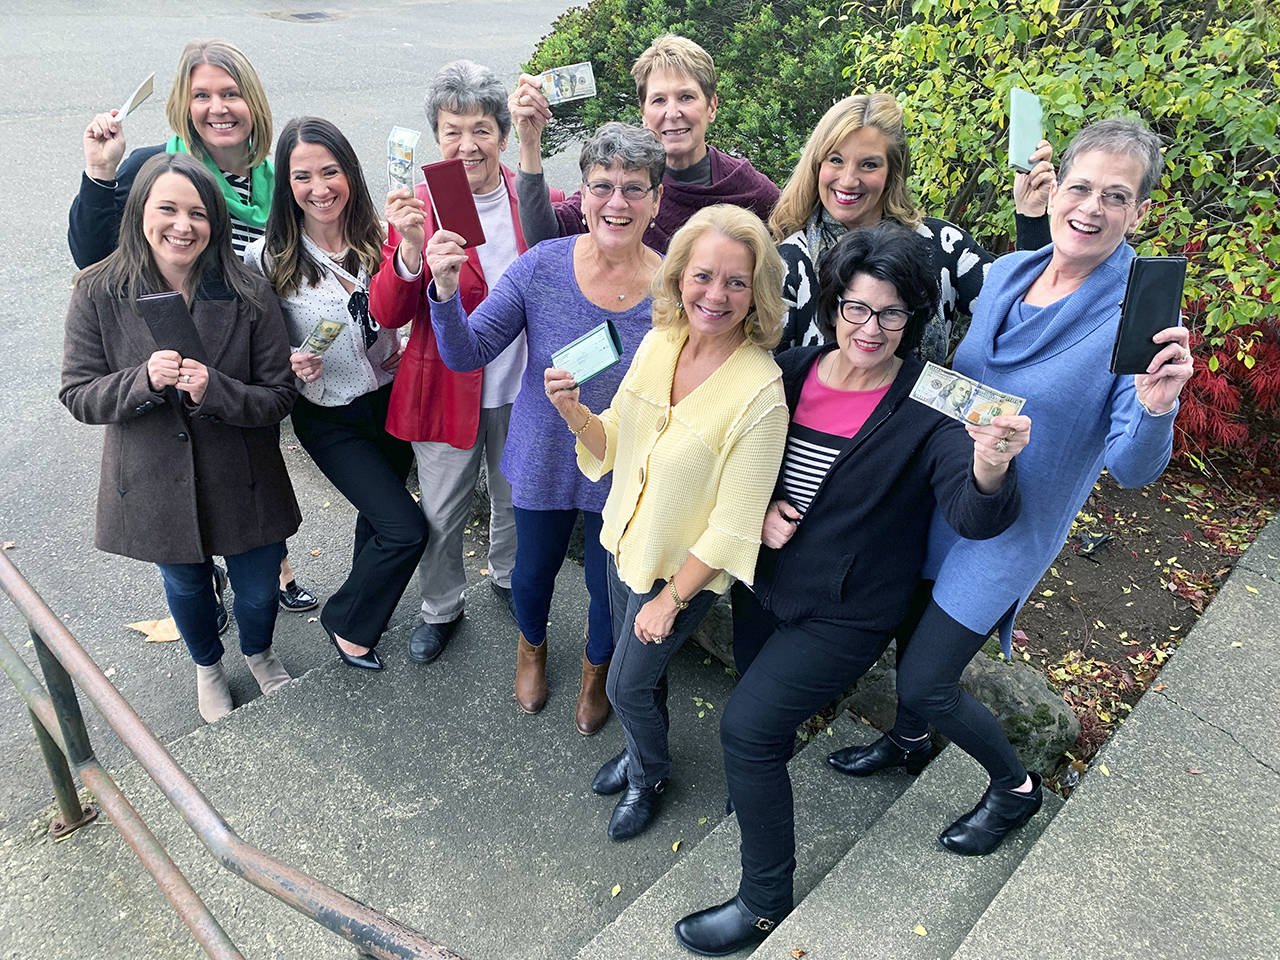 Kat Bryant | Grays Harbor News Group                                The founding members of 100+ Harbor Women Who Care are ready to share the wealth with local nonprofits. From left, they are Alissa Shay, Molly Bold, Franzine Potts, Martha George, Diana Grigsby, Maryann Welch, Dori Unterseher, Jessica Hoover, Donnajeanne Williams and Pat Oleachea.